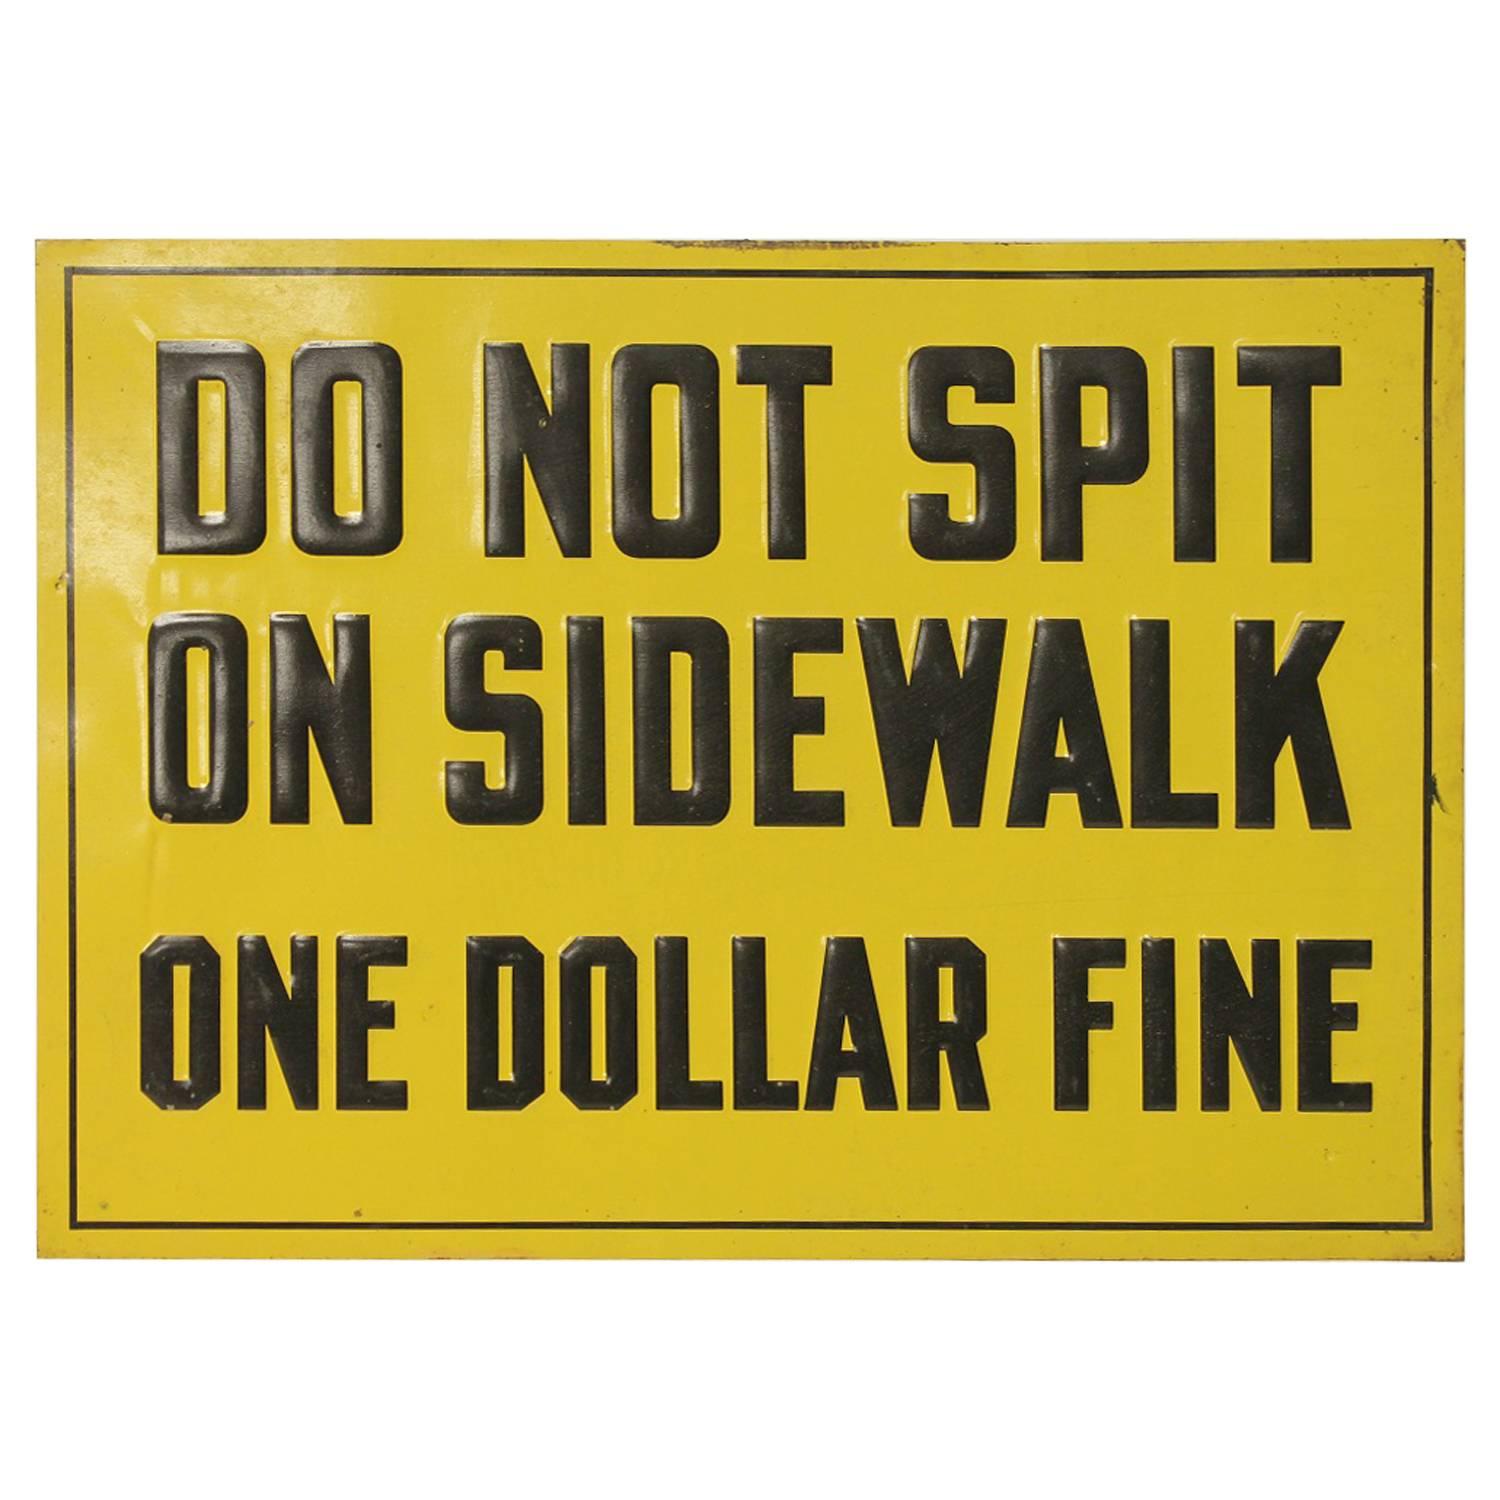  1930s Embossed Metal Sign "One Dollar Fine" 